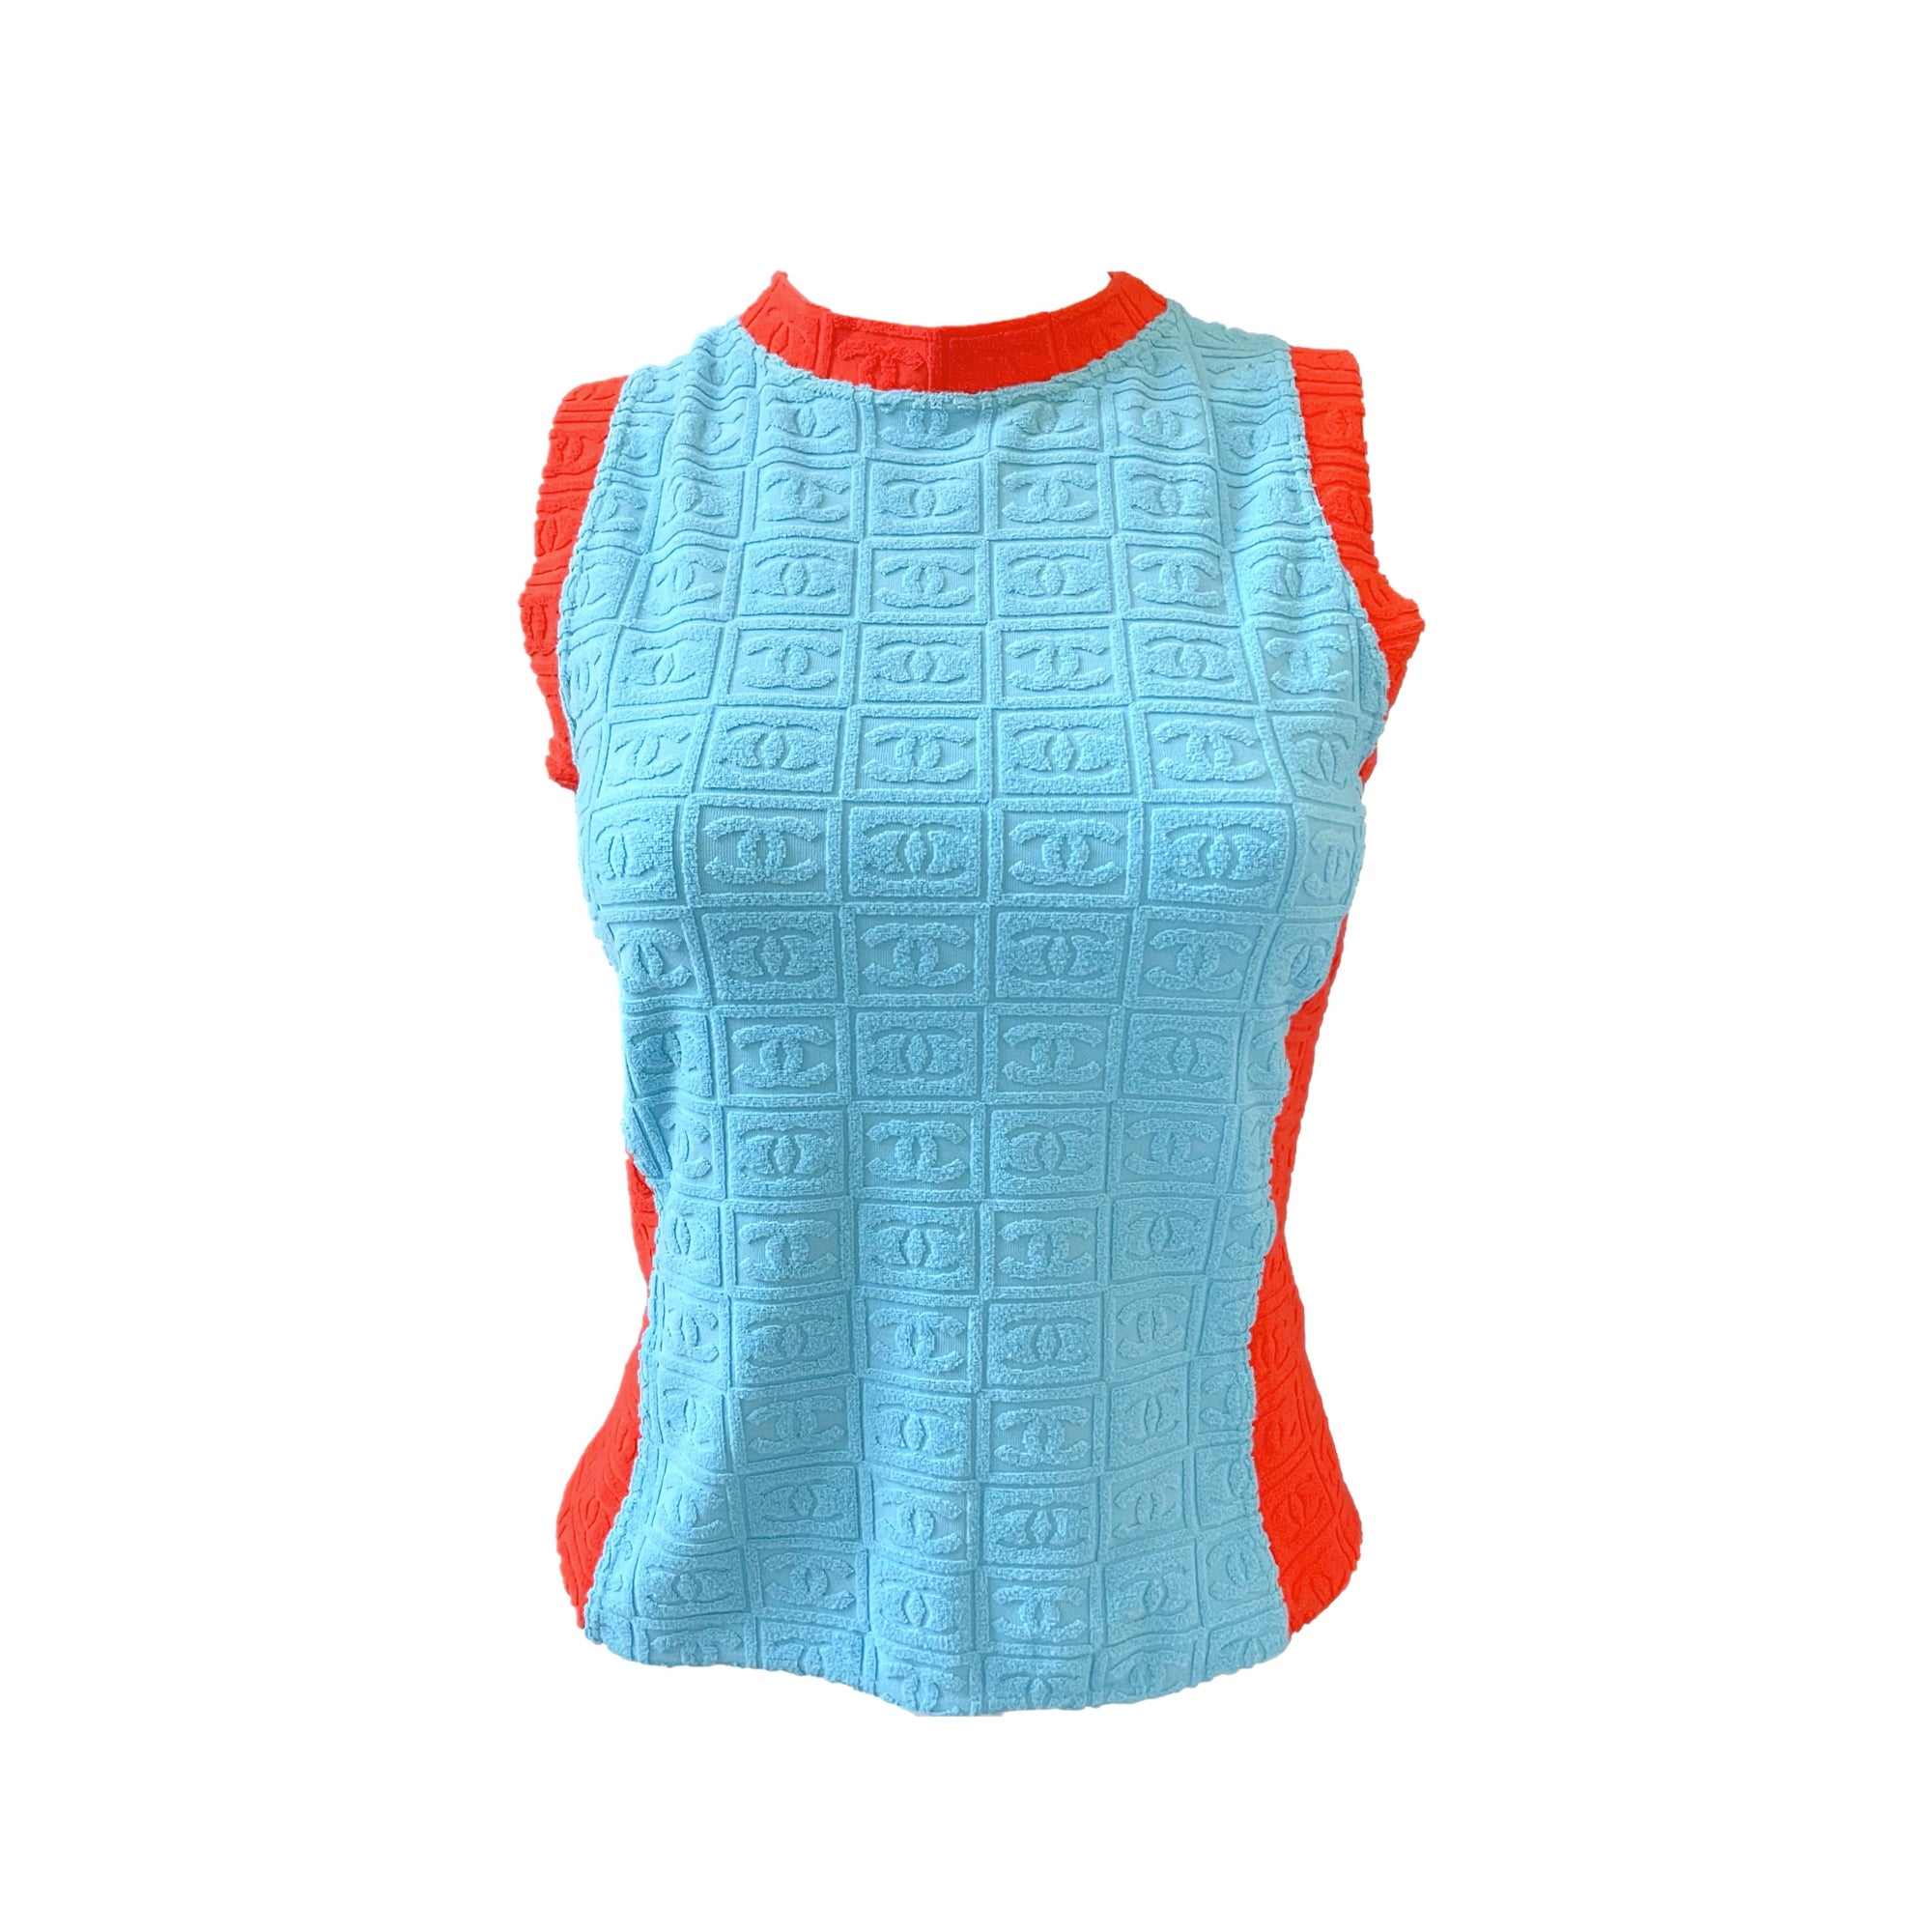 Chanel Baby Blue Terrycloth Tank Top - Apparel